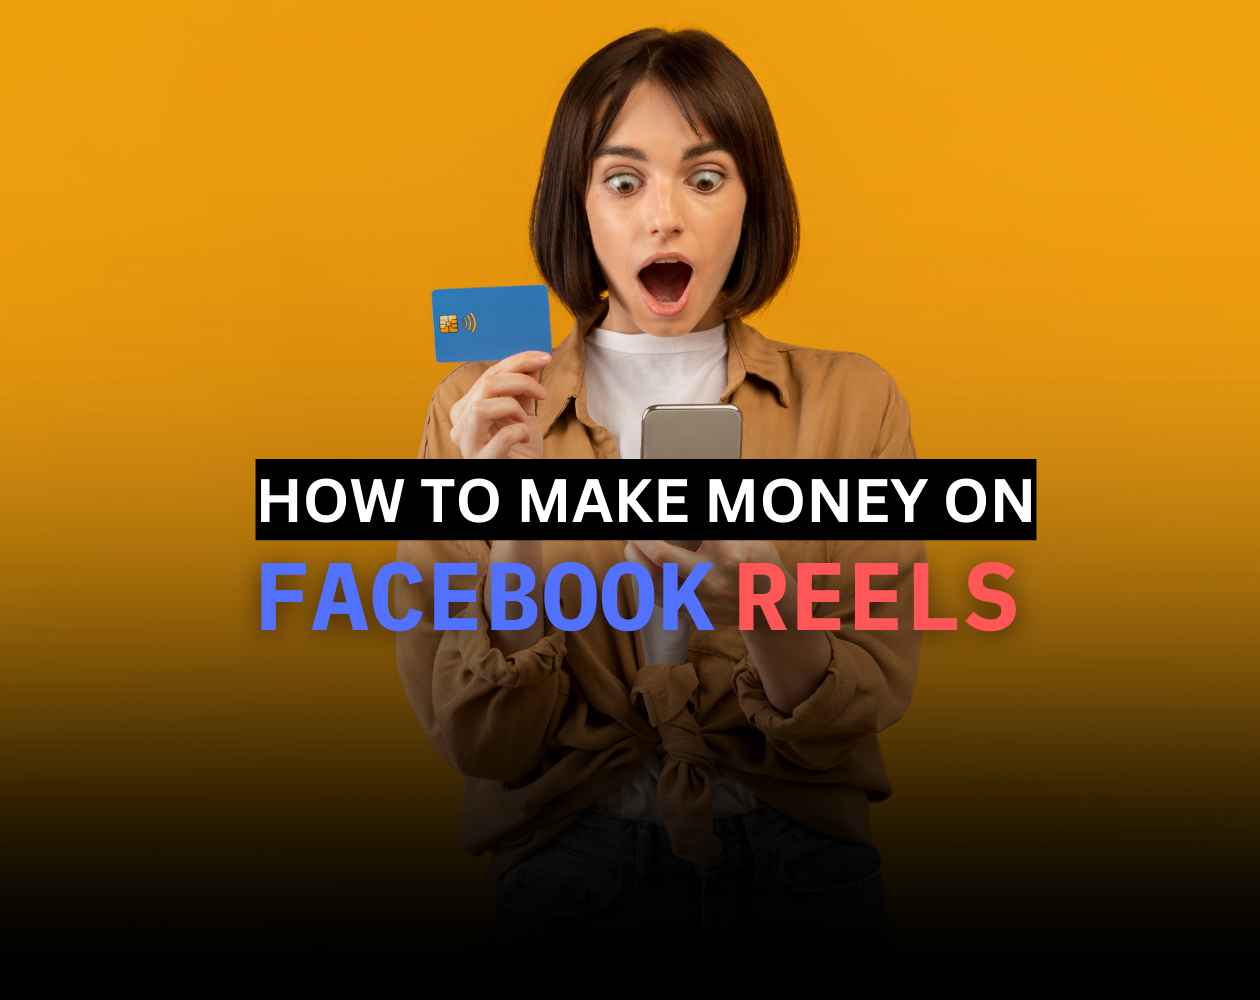 How to make money on Facebook reels without showing your face.